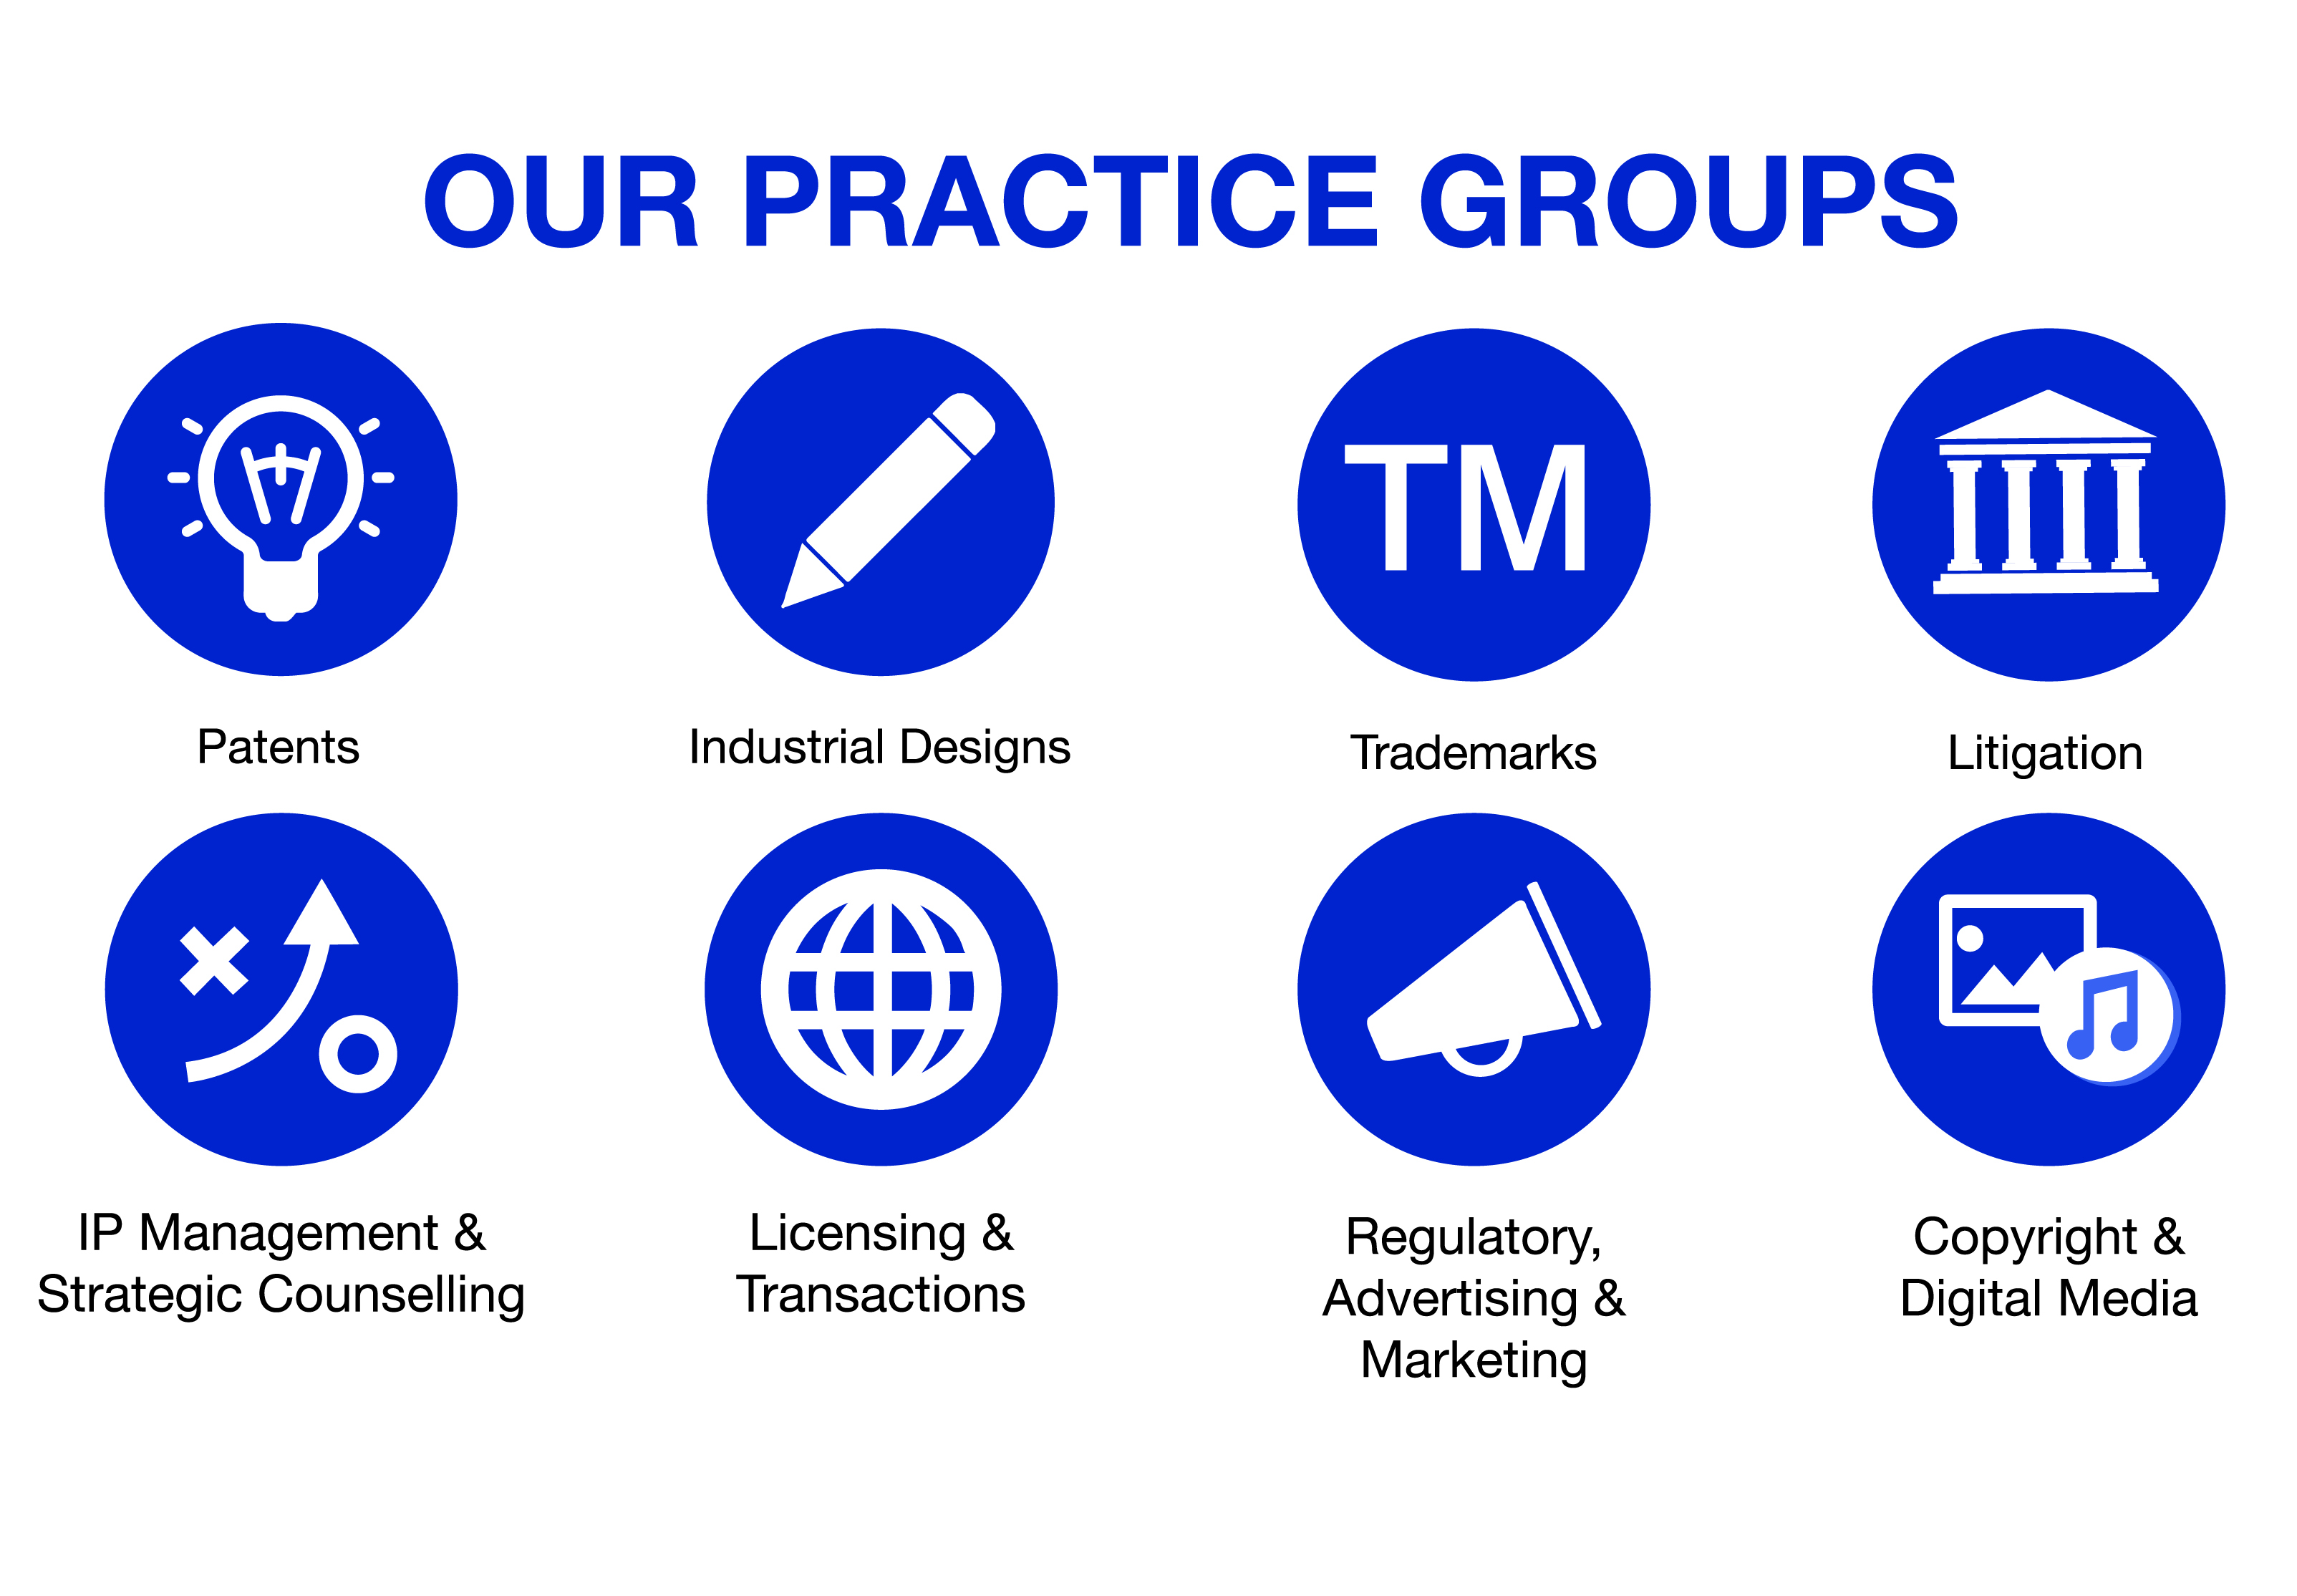 Our practice groups